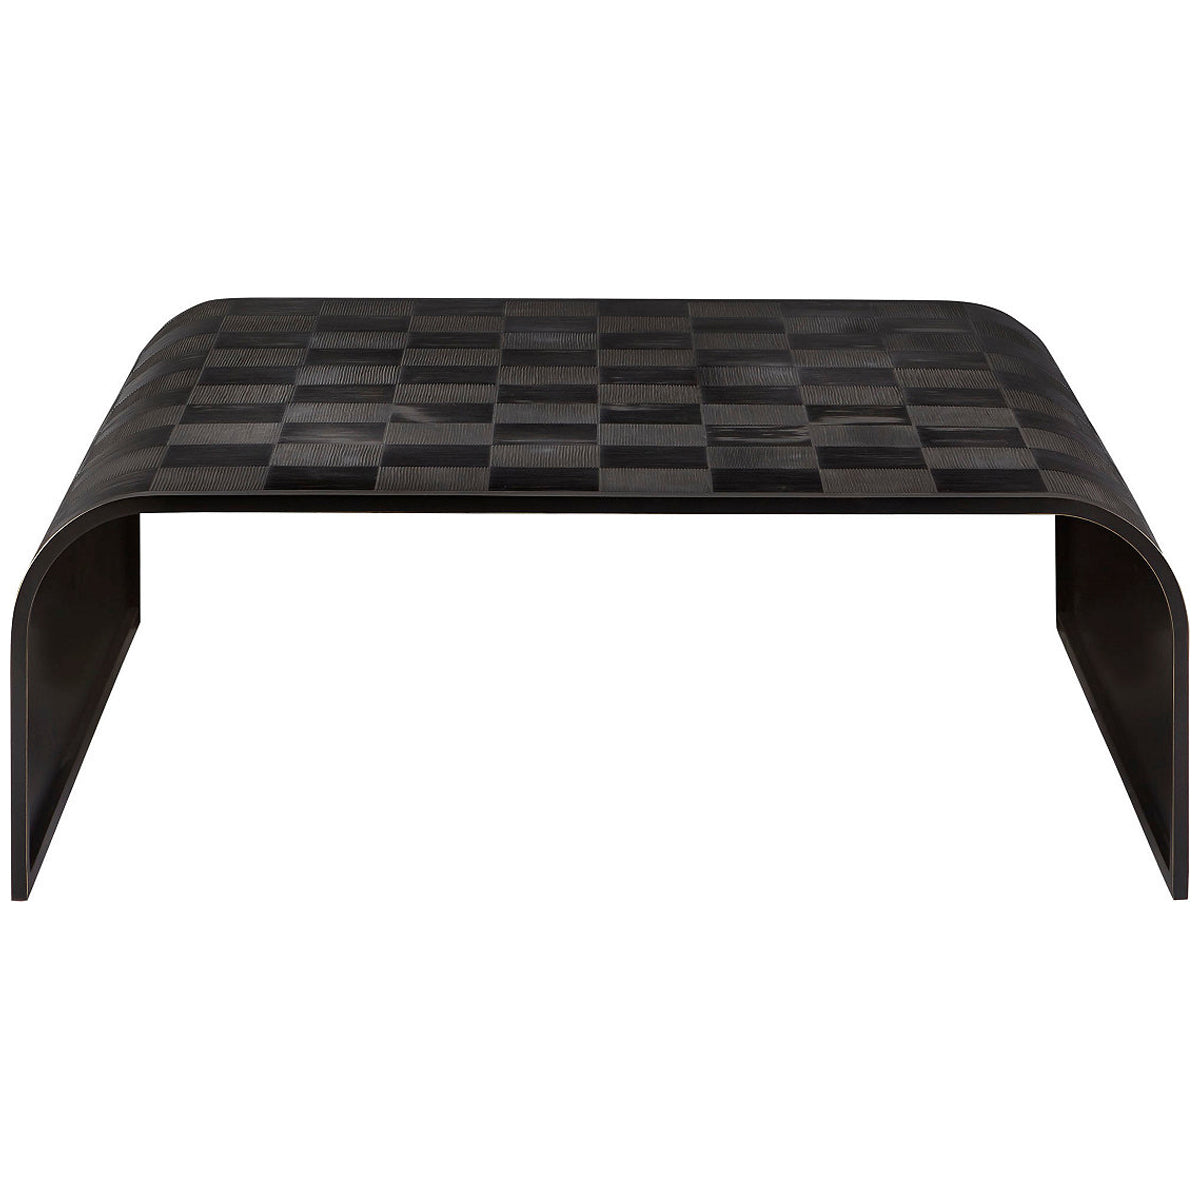 Baker Furniture Weave Square Cocktail Table MCA2153